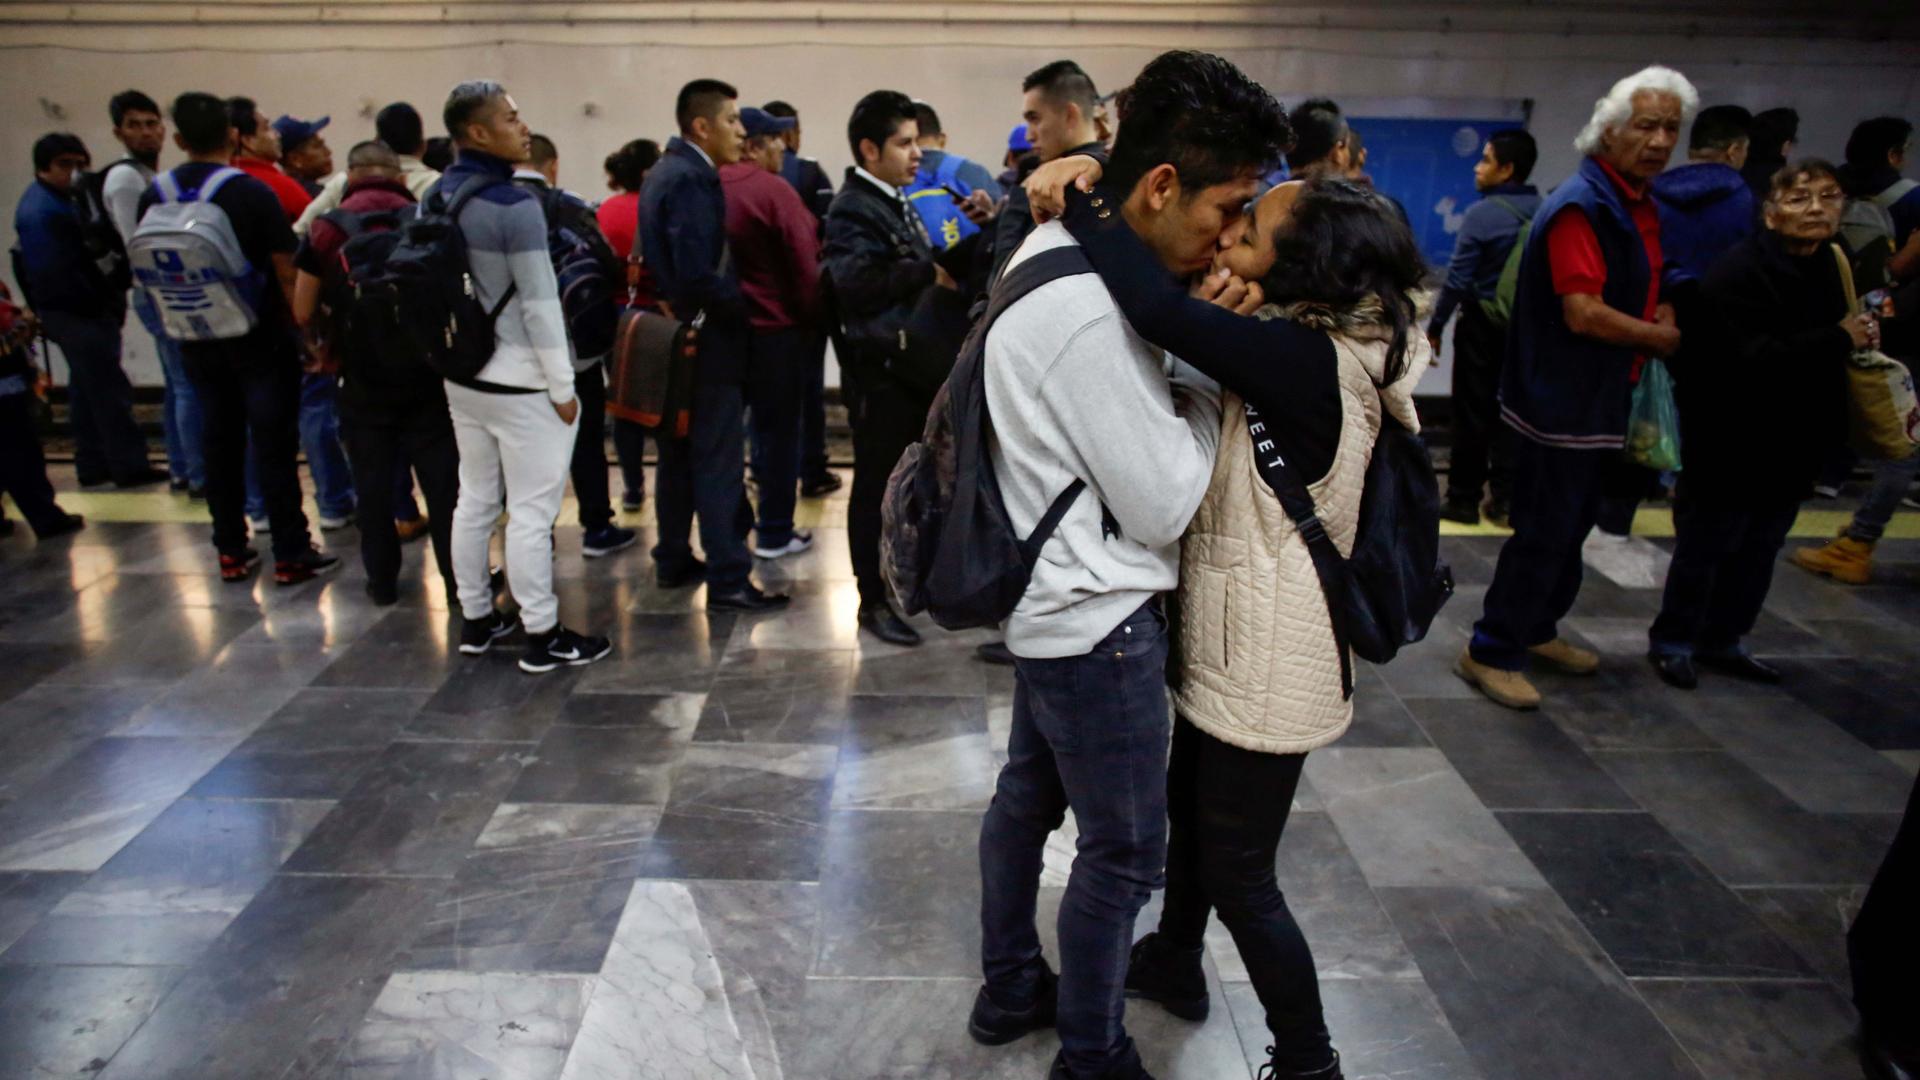 A couple kiss in the Pantitlan metro station as Mexico's government is seeking to minimize public disruption in its response to the coronavirus disease (COVID-19), in Mexico City, Mexico, on March 17, 2020.